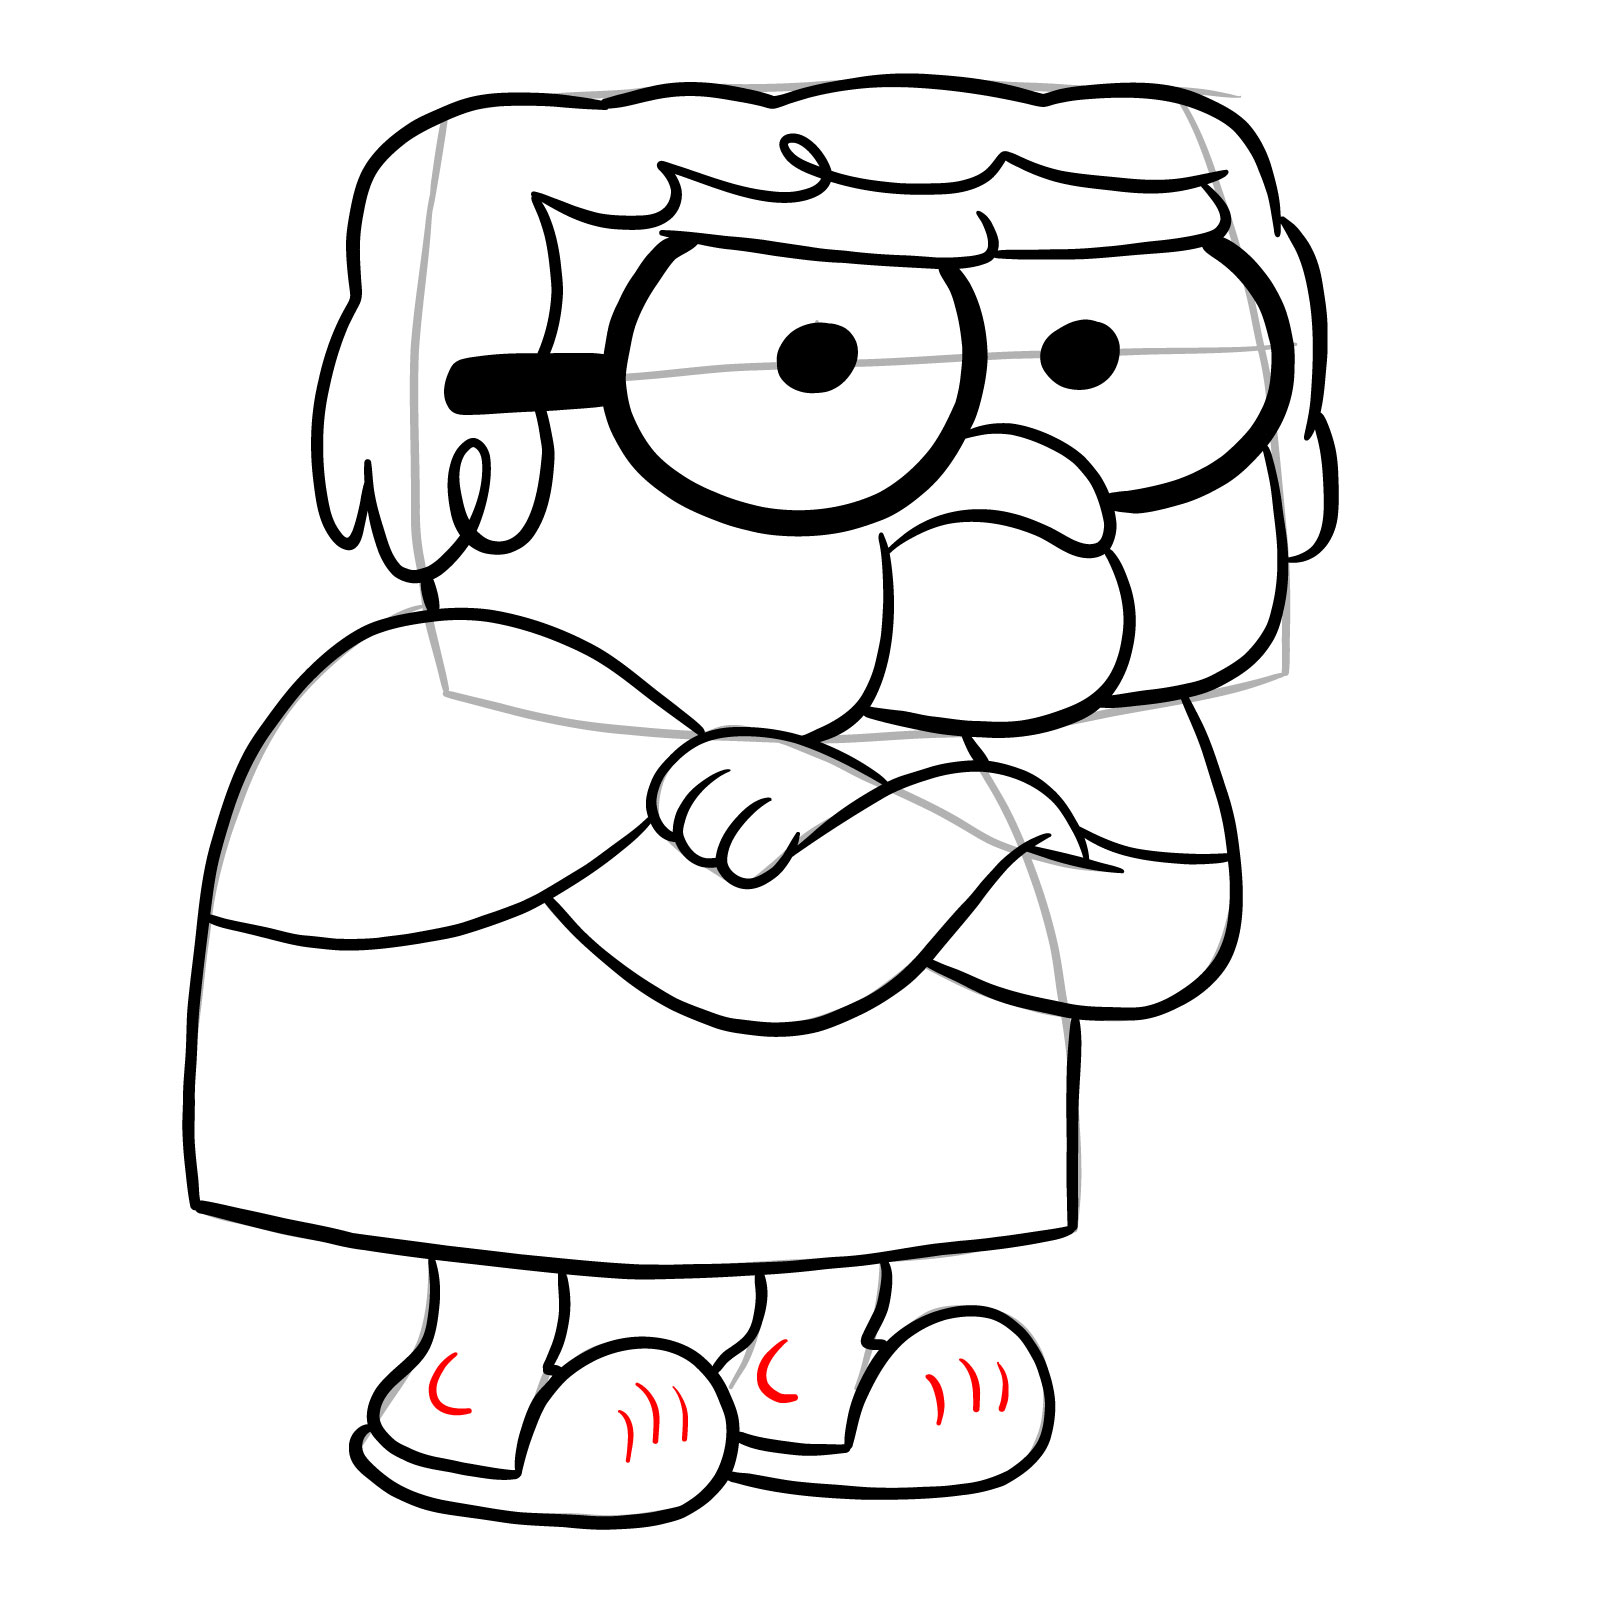 How to draw Gramma from Big City Greens - step 24